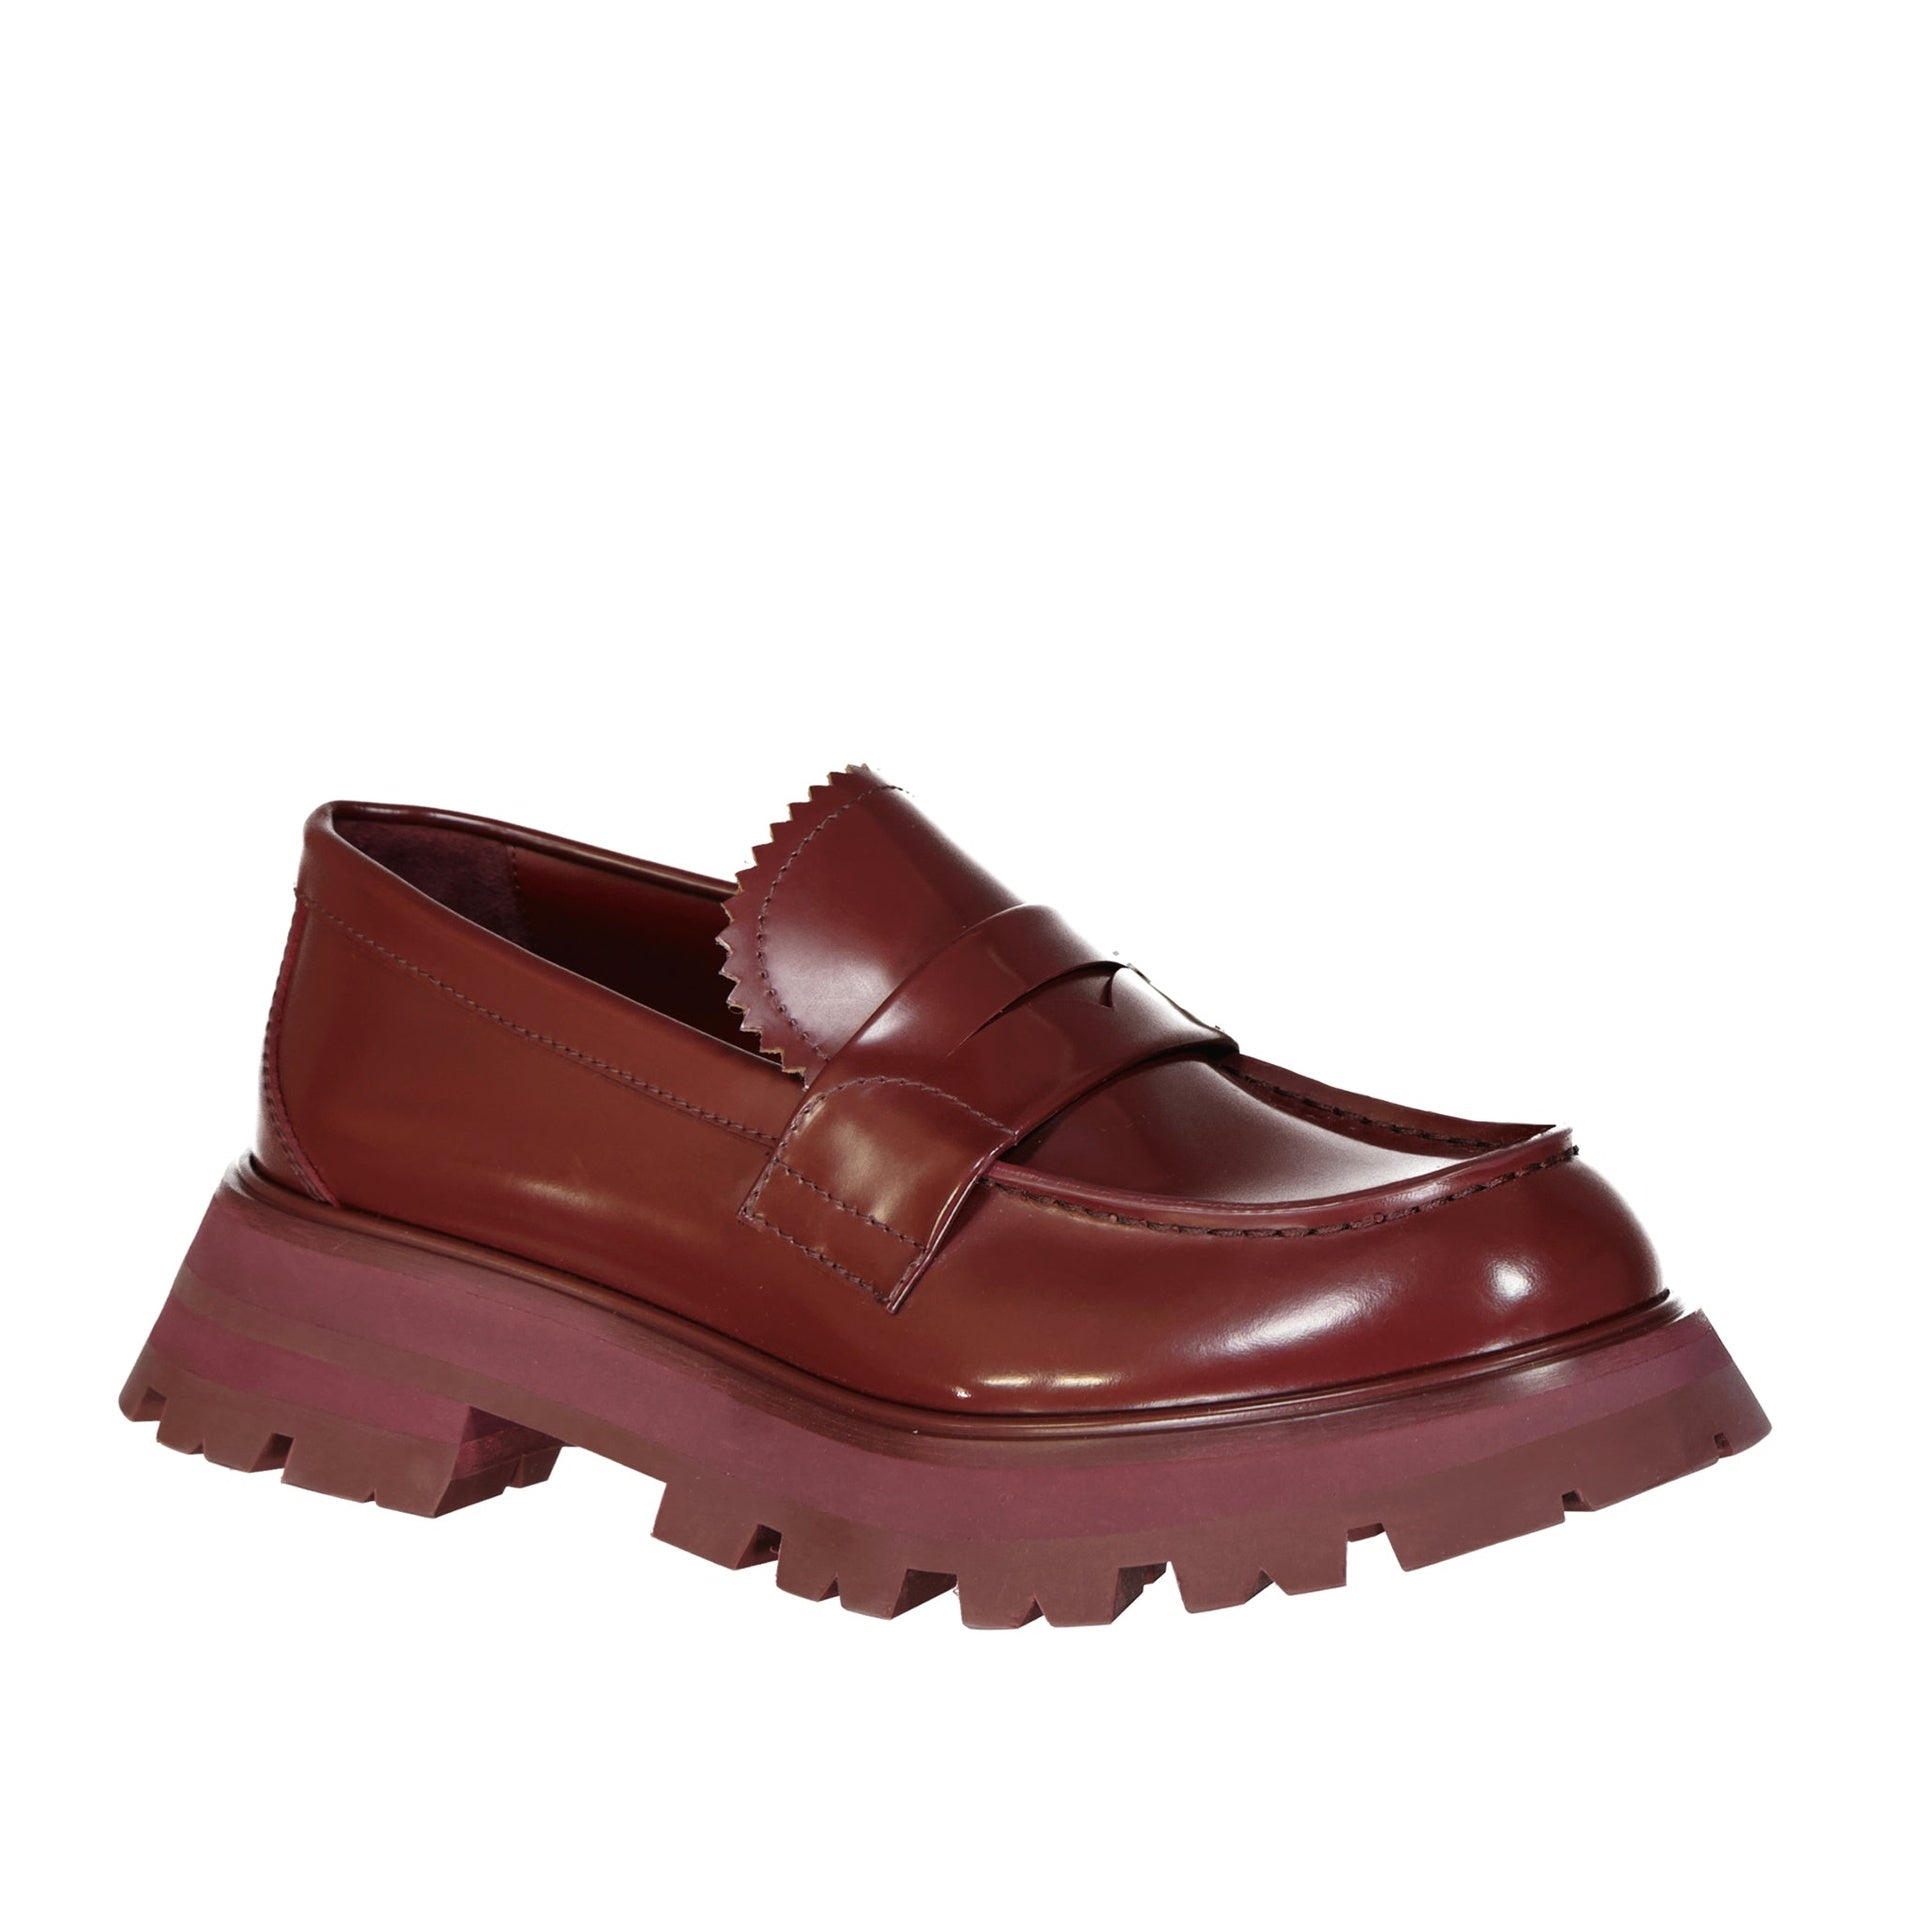 ALEXANDER-MCQUEEN-OUTLET-SALE-Alexander-Mcqueen-Leather-Loafers-Flache-Schuhe-RED-39-ARCHIVE-COLLECTION-2.jpg